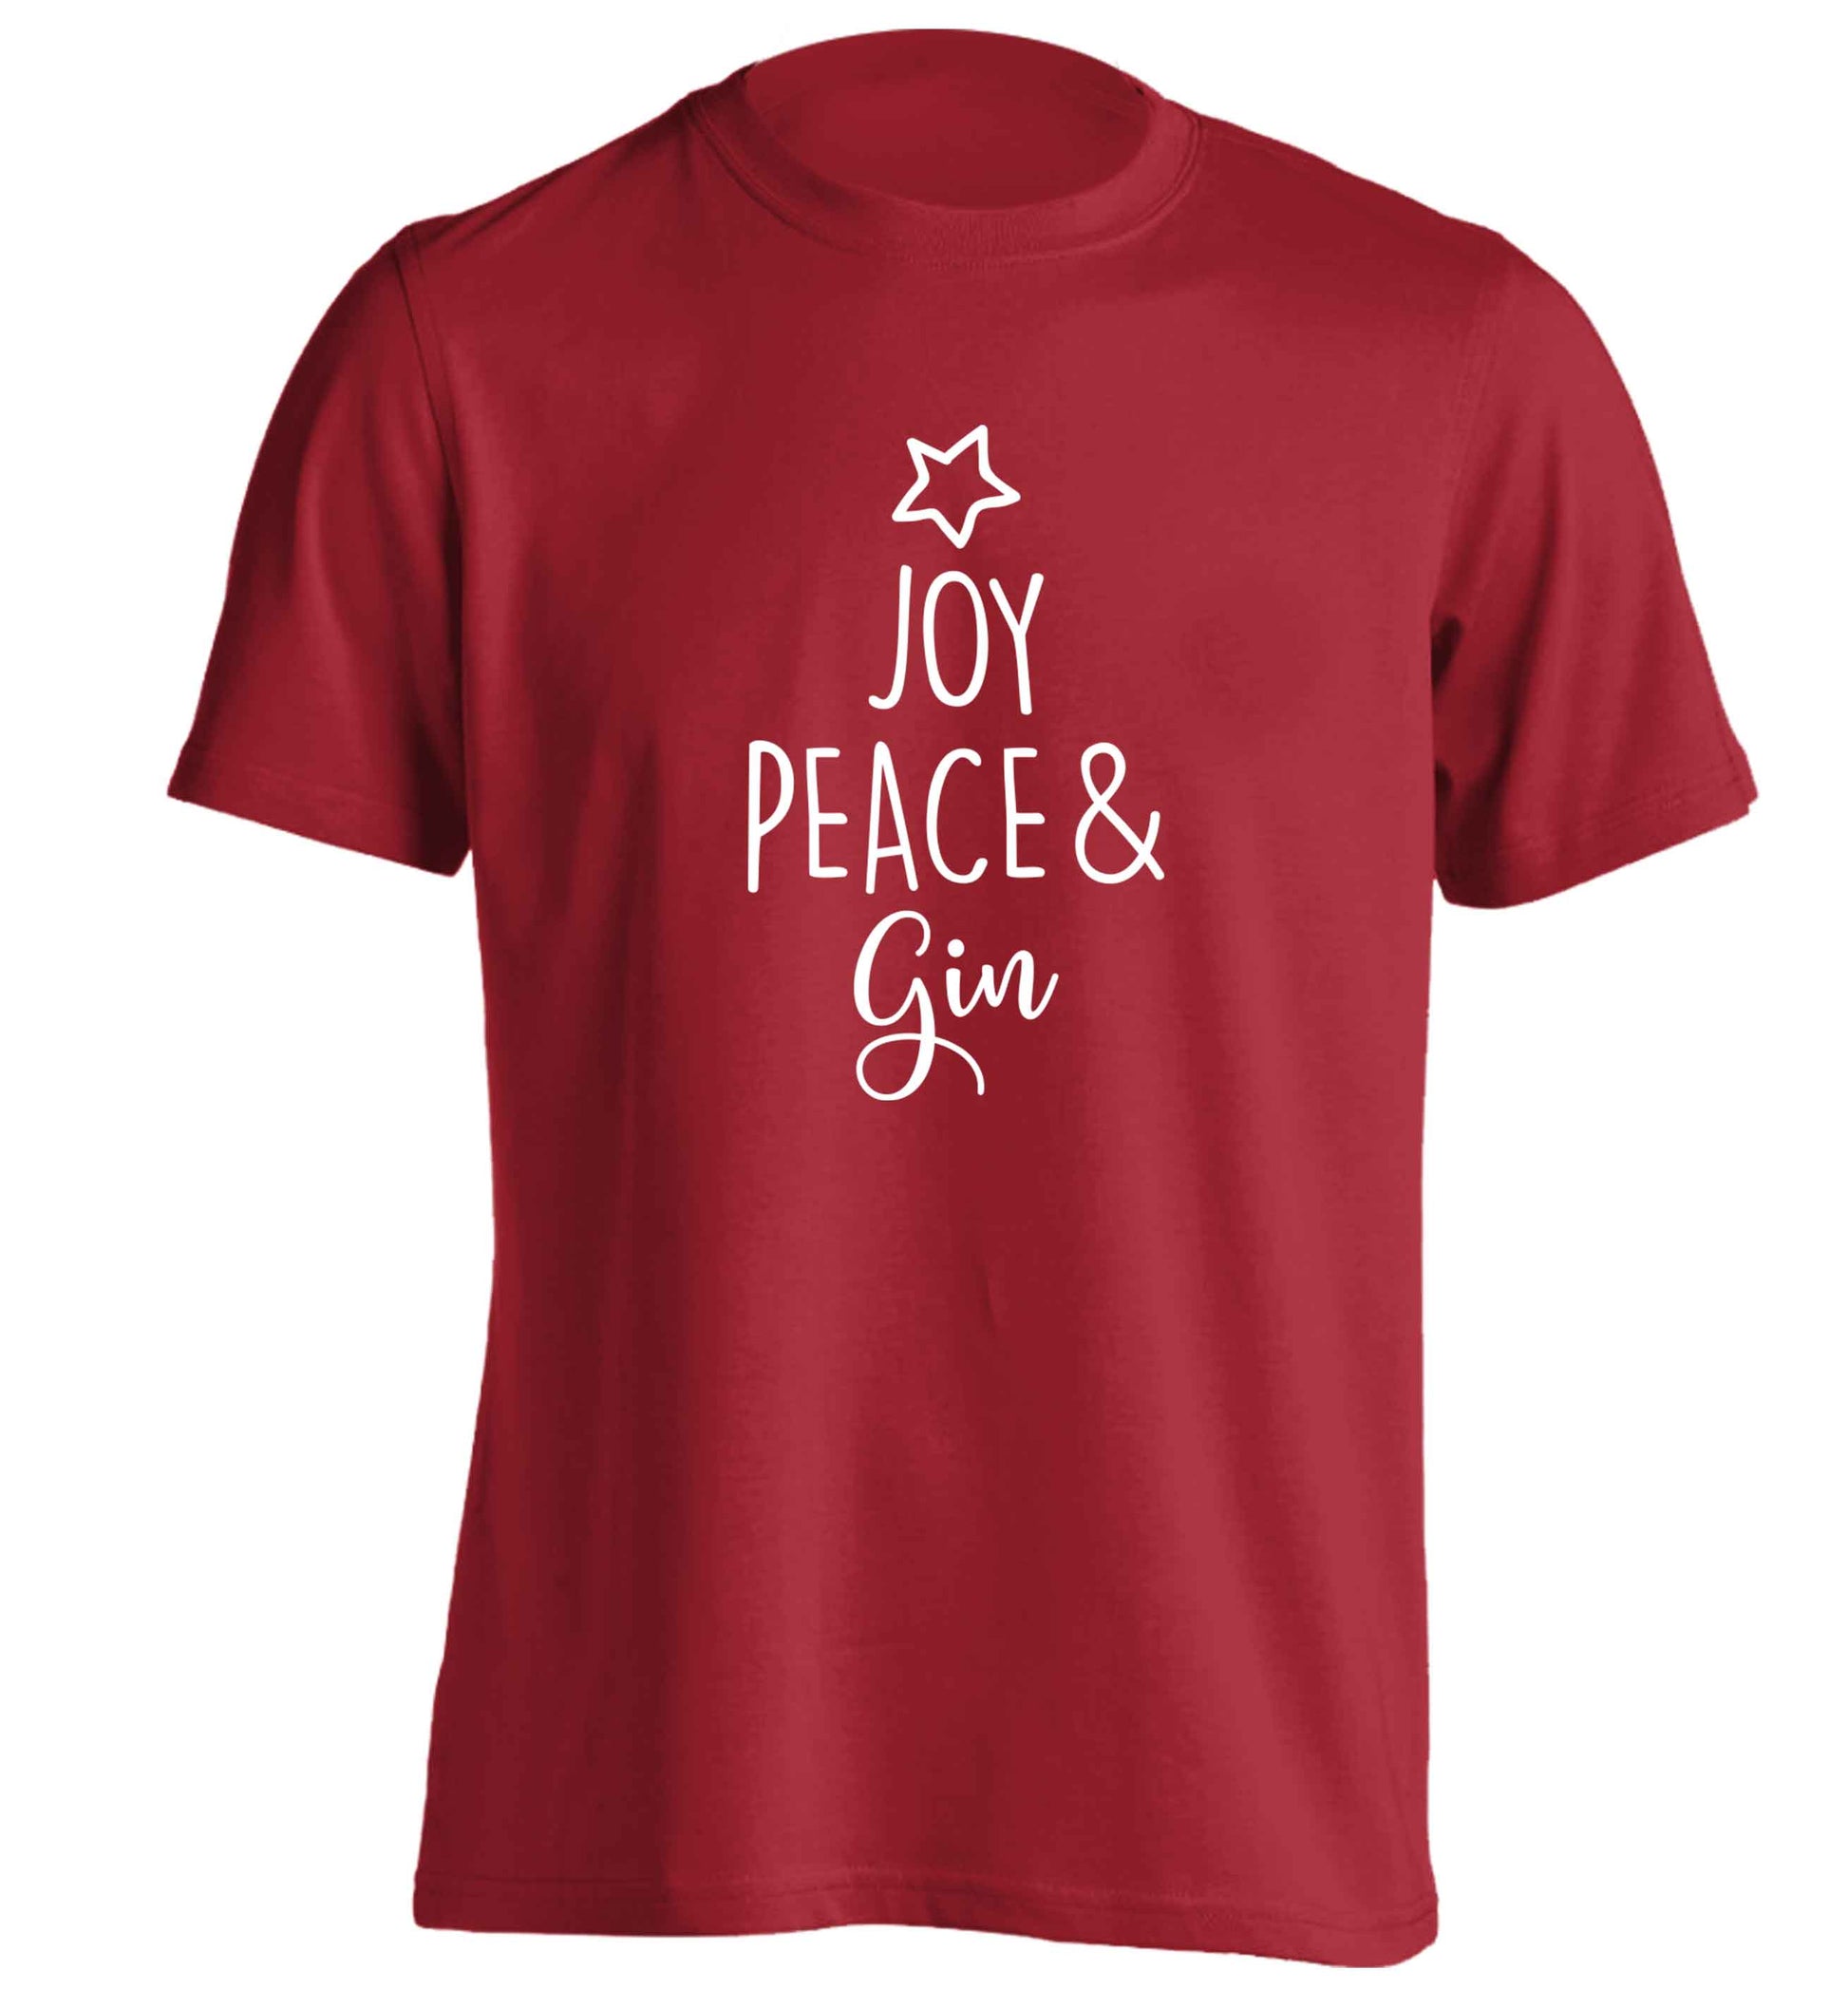 Joy peace and gin adults unisex red Tshirt 2XL